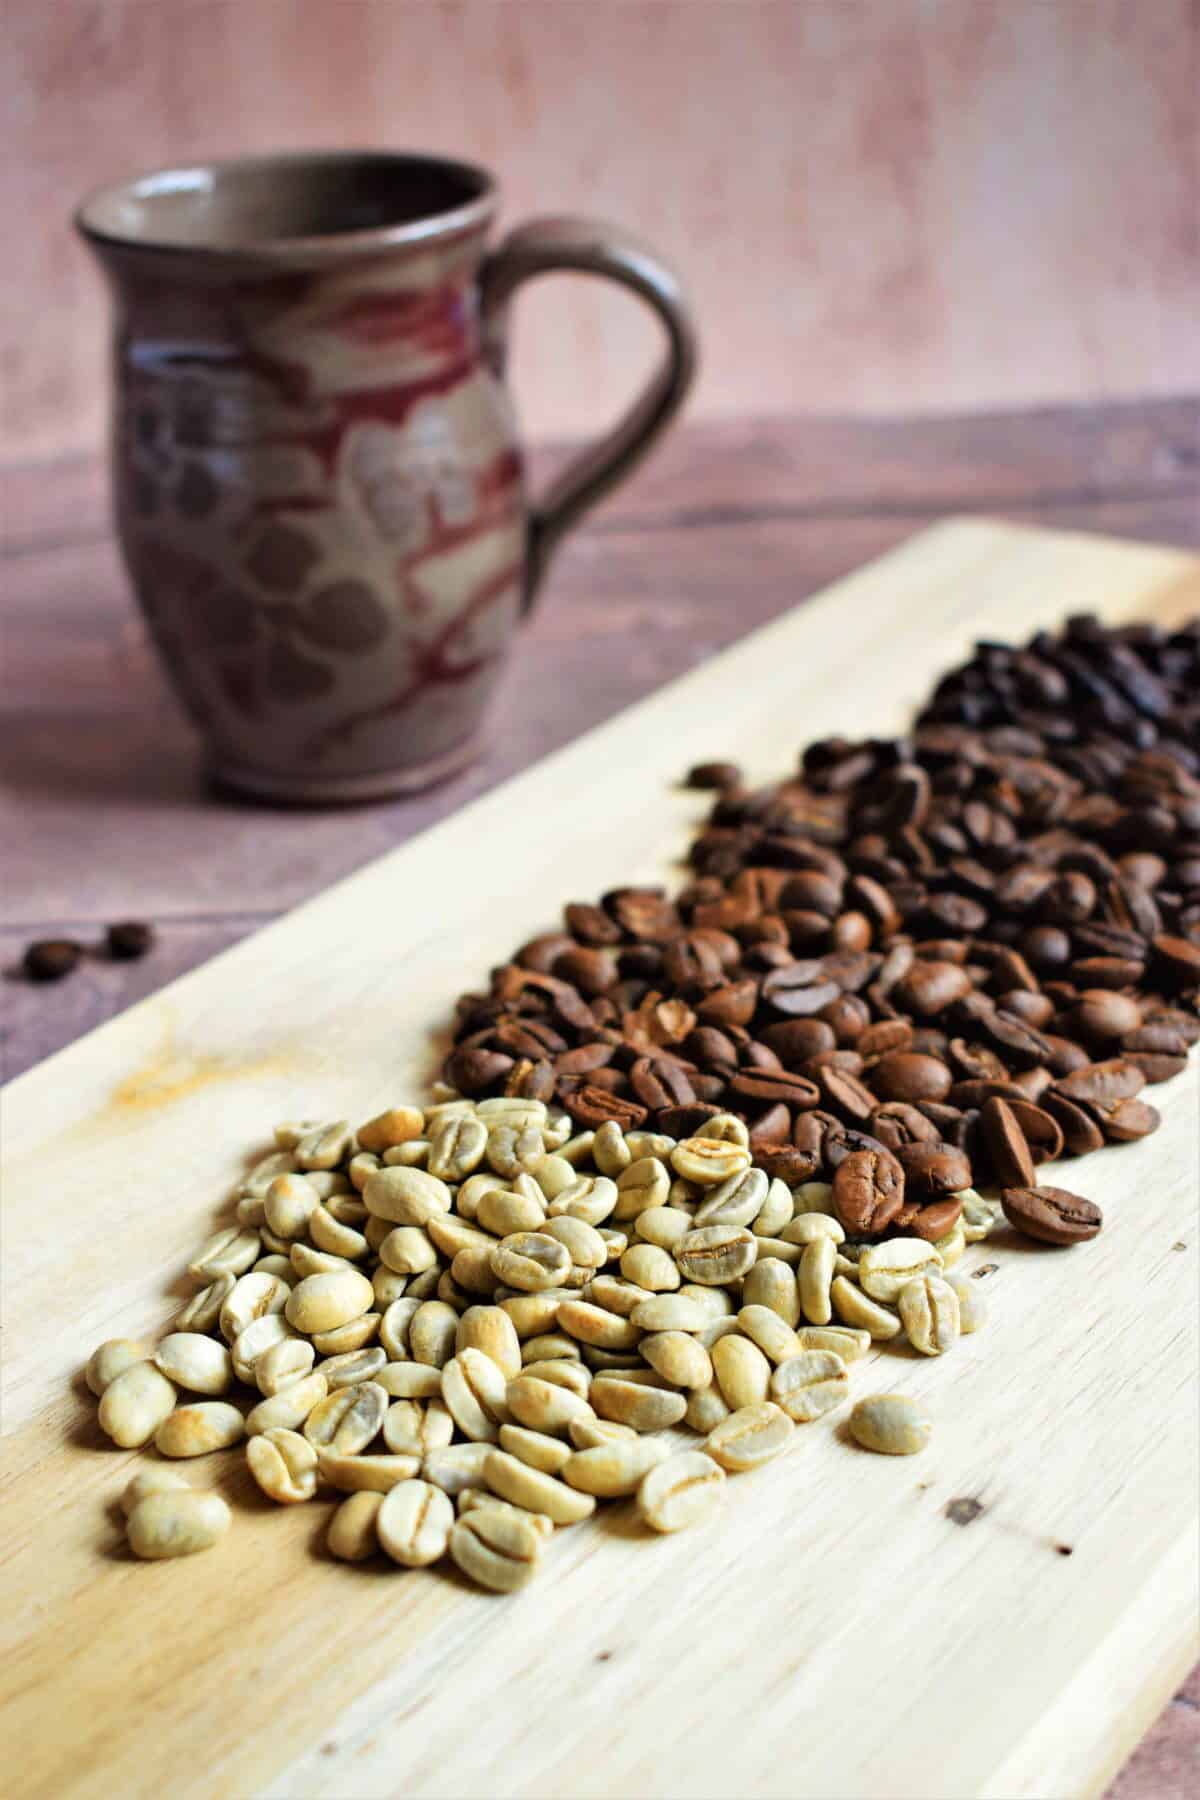 Green and brown coffee beans on wooden serving board.